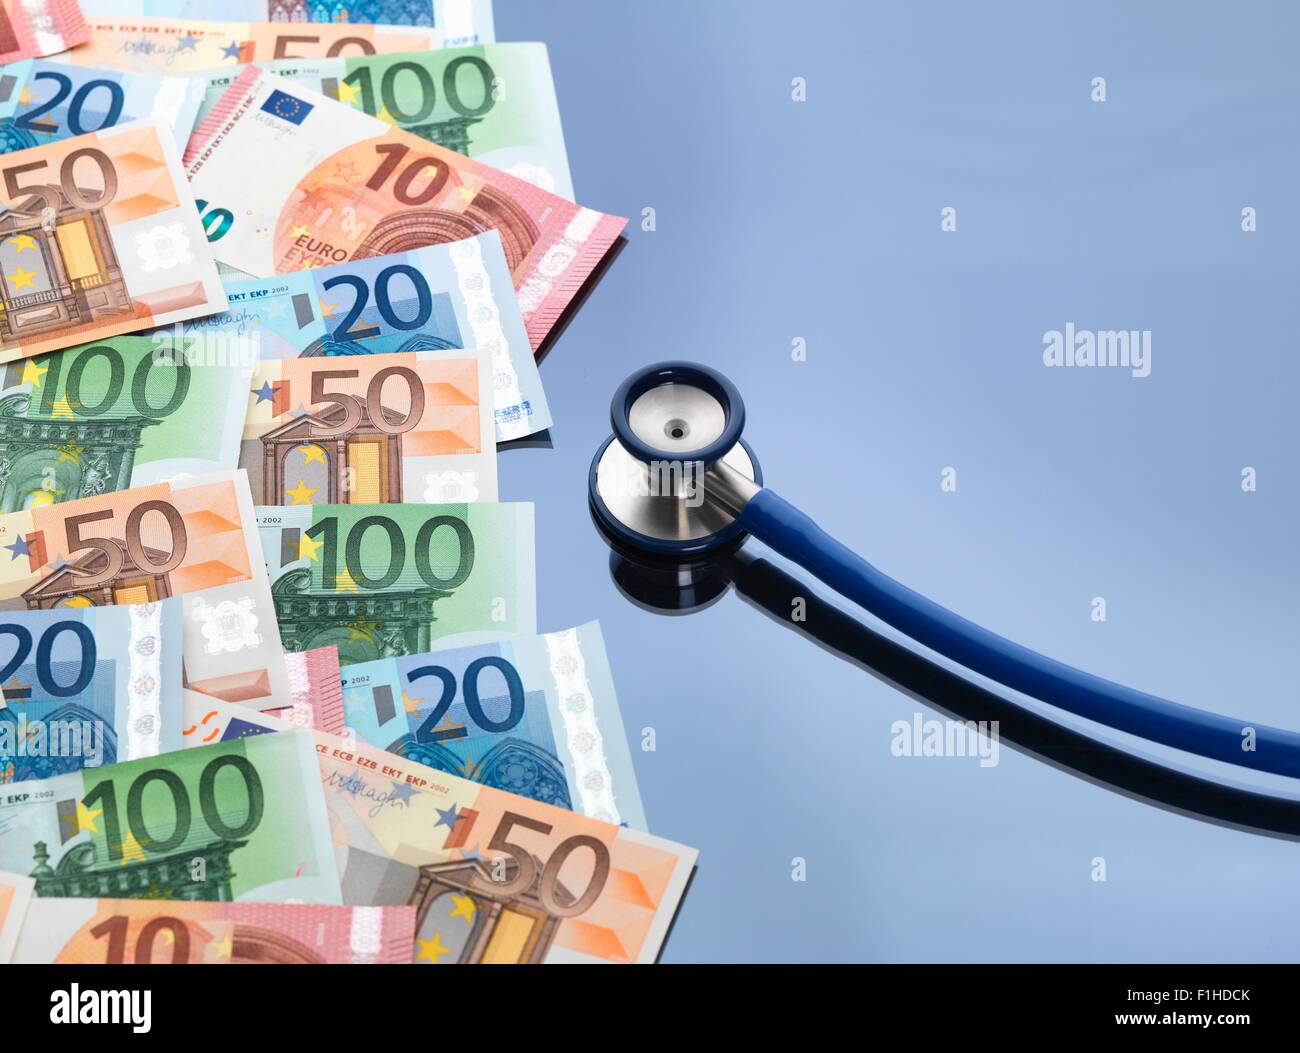 Stethoscope with euro currency notes Stock Photo